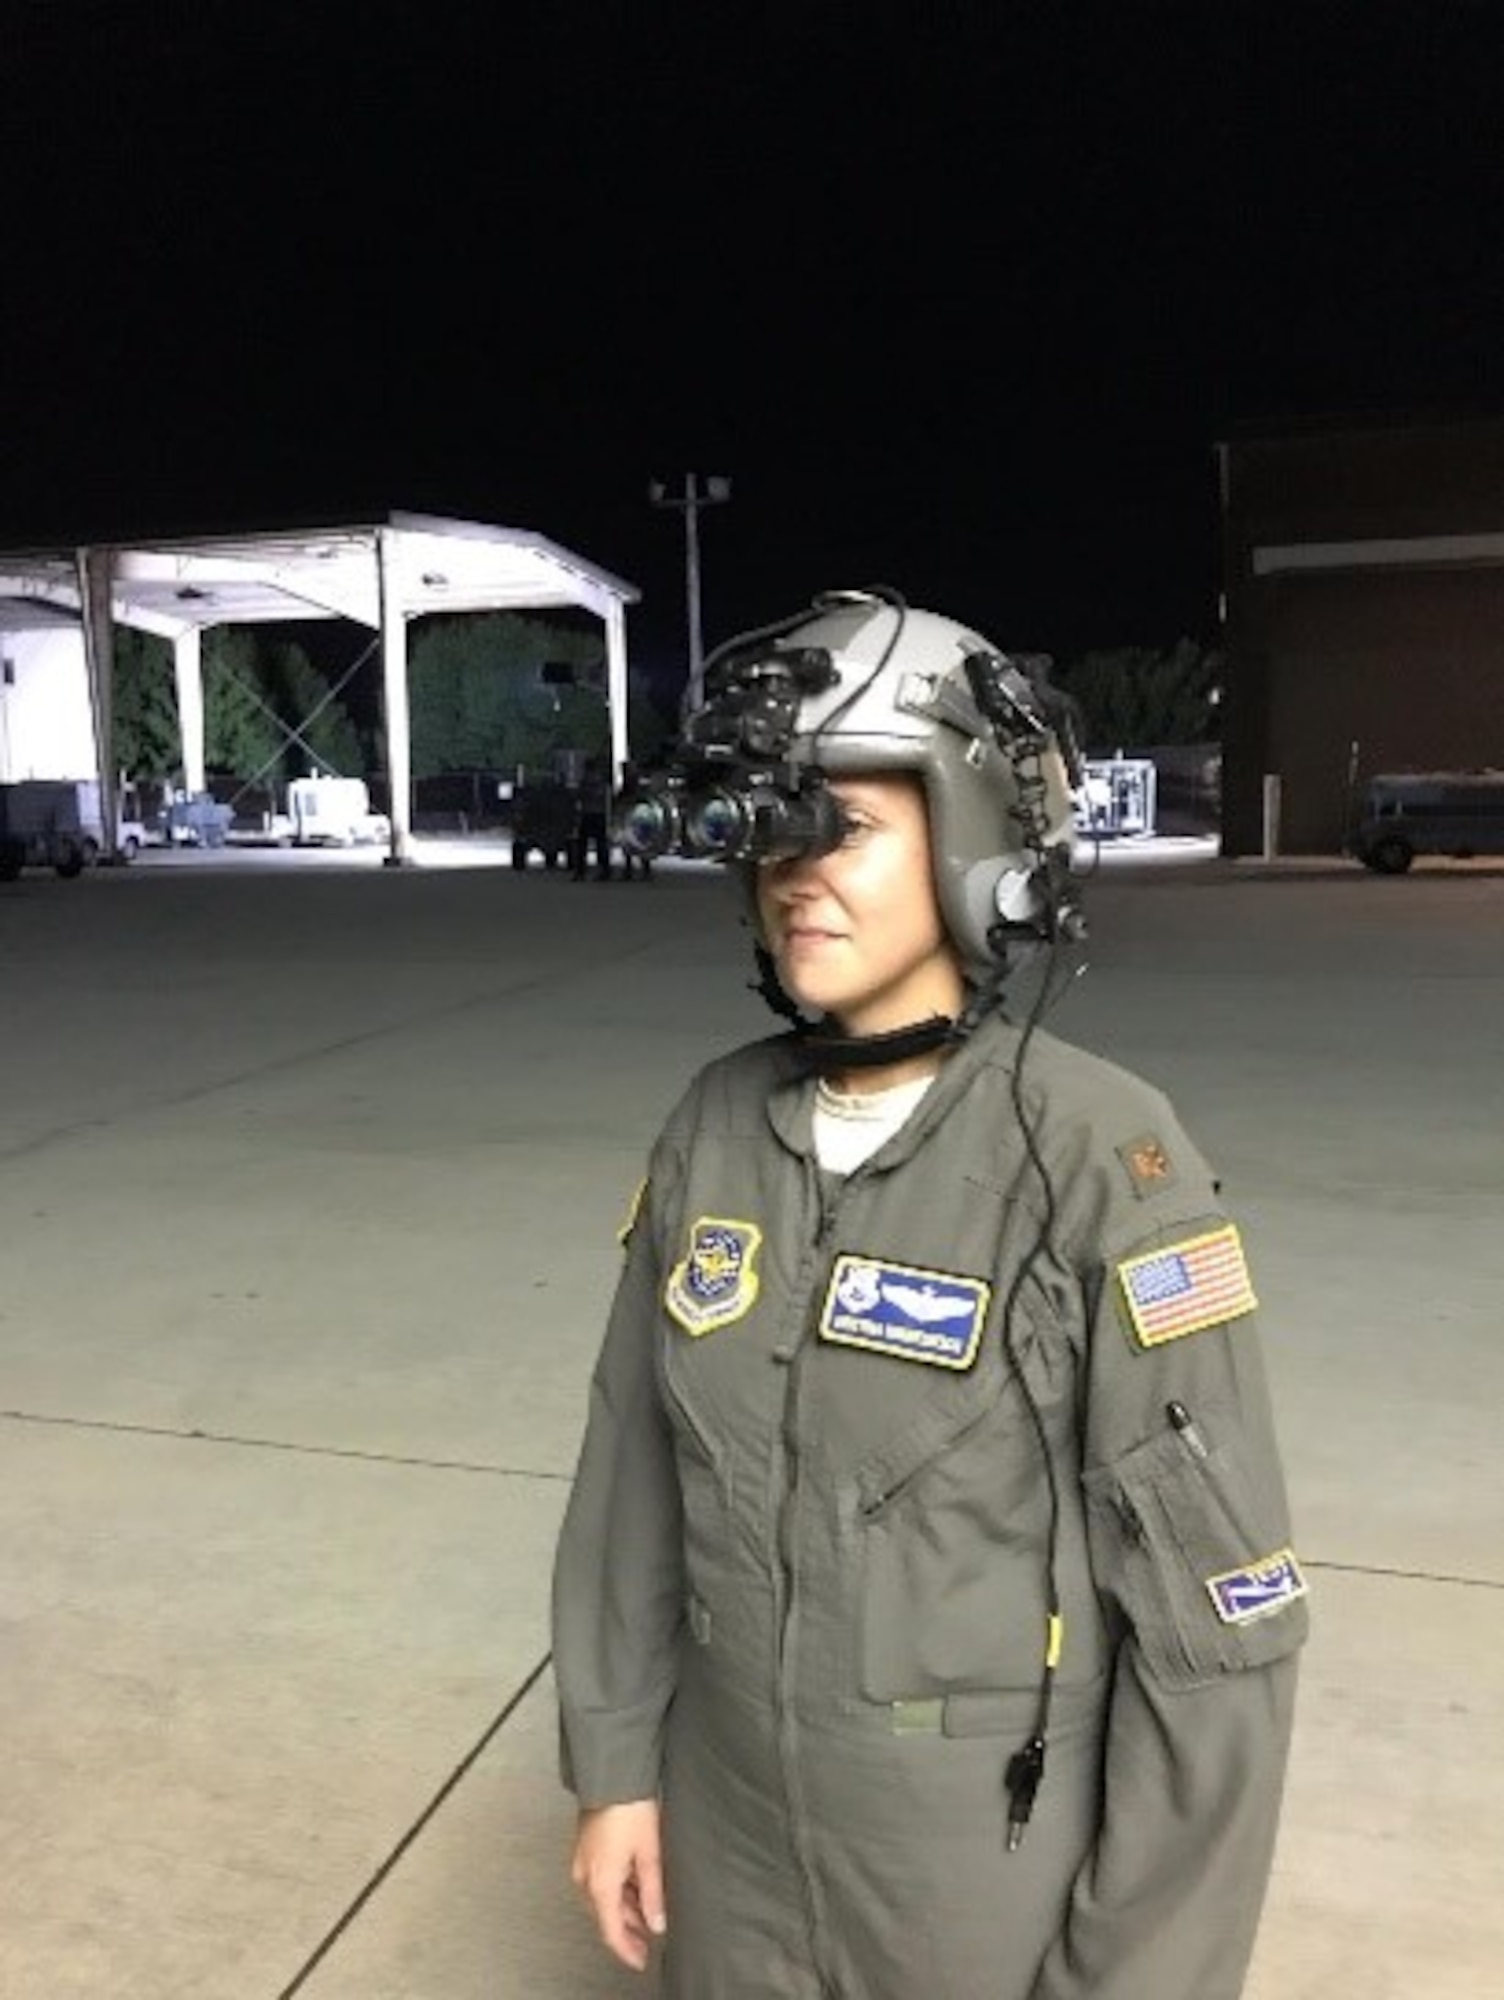 Maj. Kristina Himmelreich, C-17 Globemaster pilot, and Tech. Sgt. Chris Olmsted, crew chief, from the Joint Base McGuire-Dix-Lakehurst, Air Mobility Command Test Evaluation Squadron, supported the project by evaluating Advanced Flightline Power and Light System’s LED impact on aircrew night vision goggles. (U.S. Air Force photo/Master Sgt. John Bono)